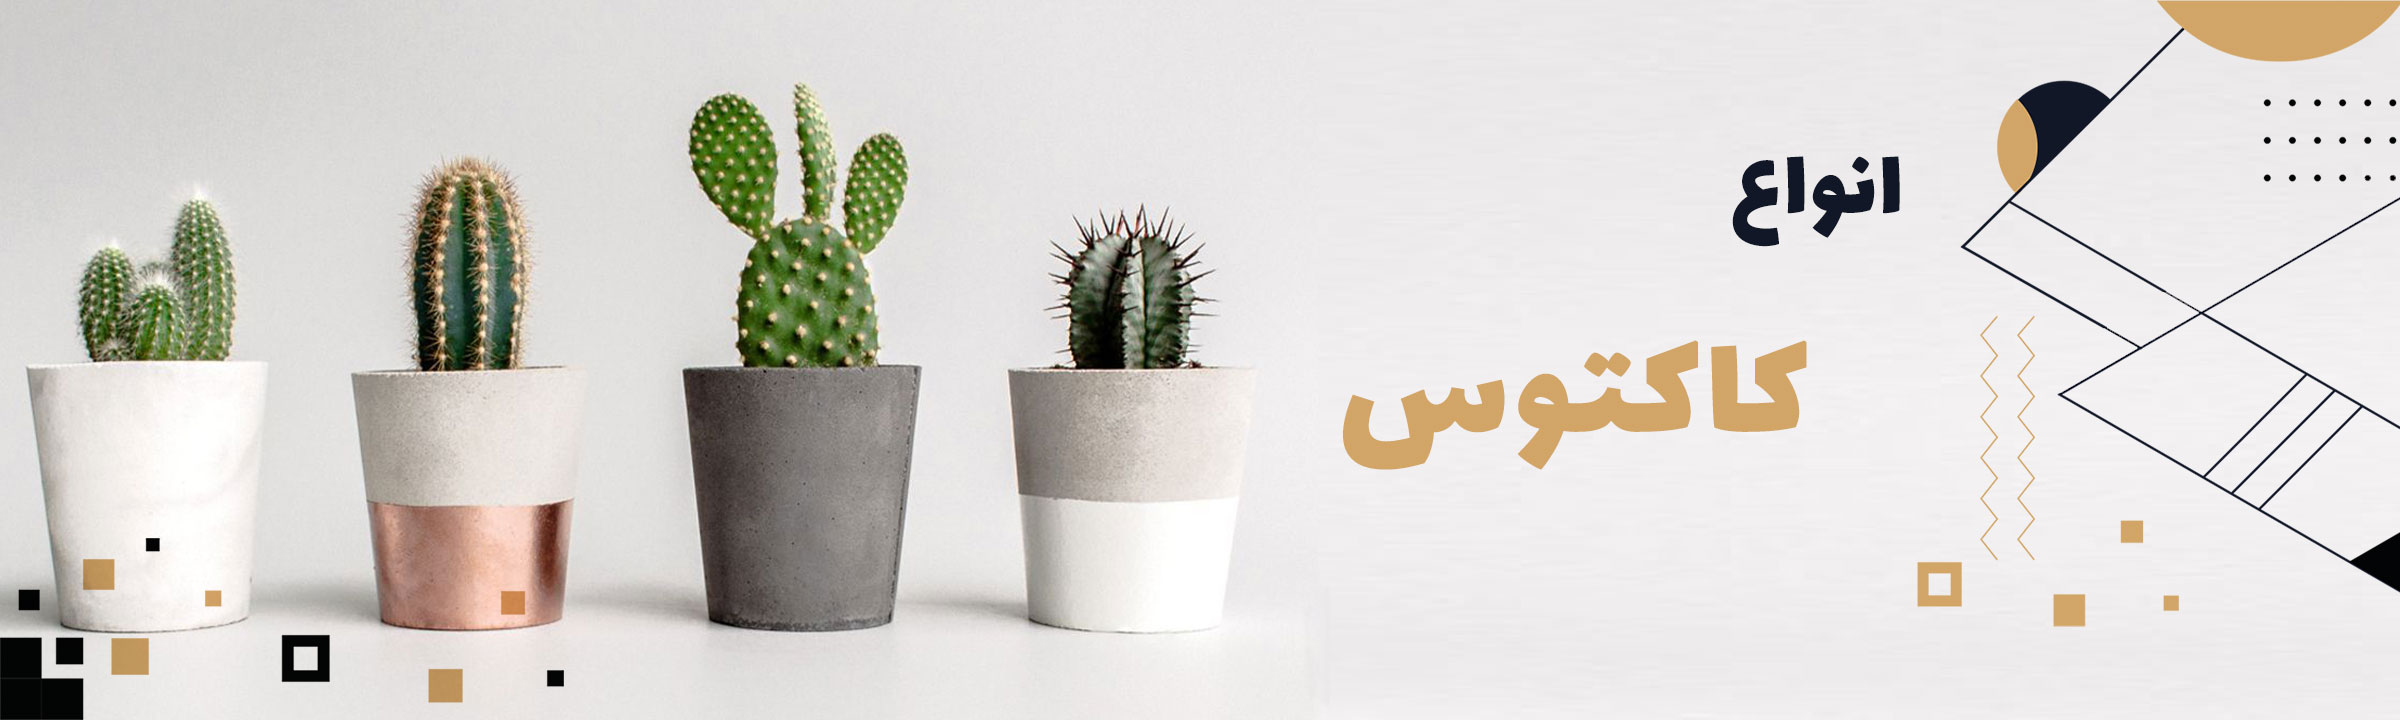 Type of cactus banner